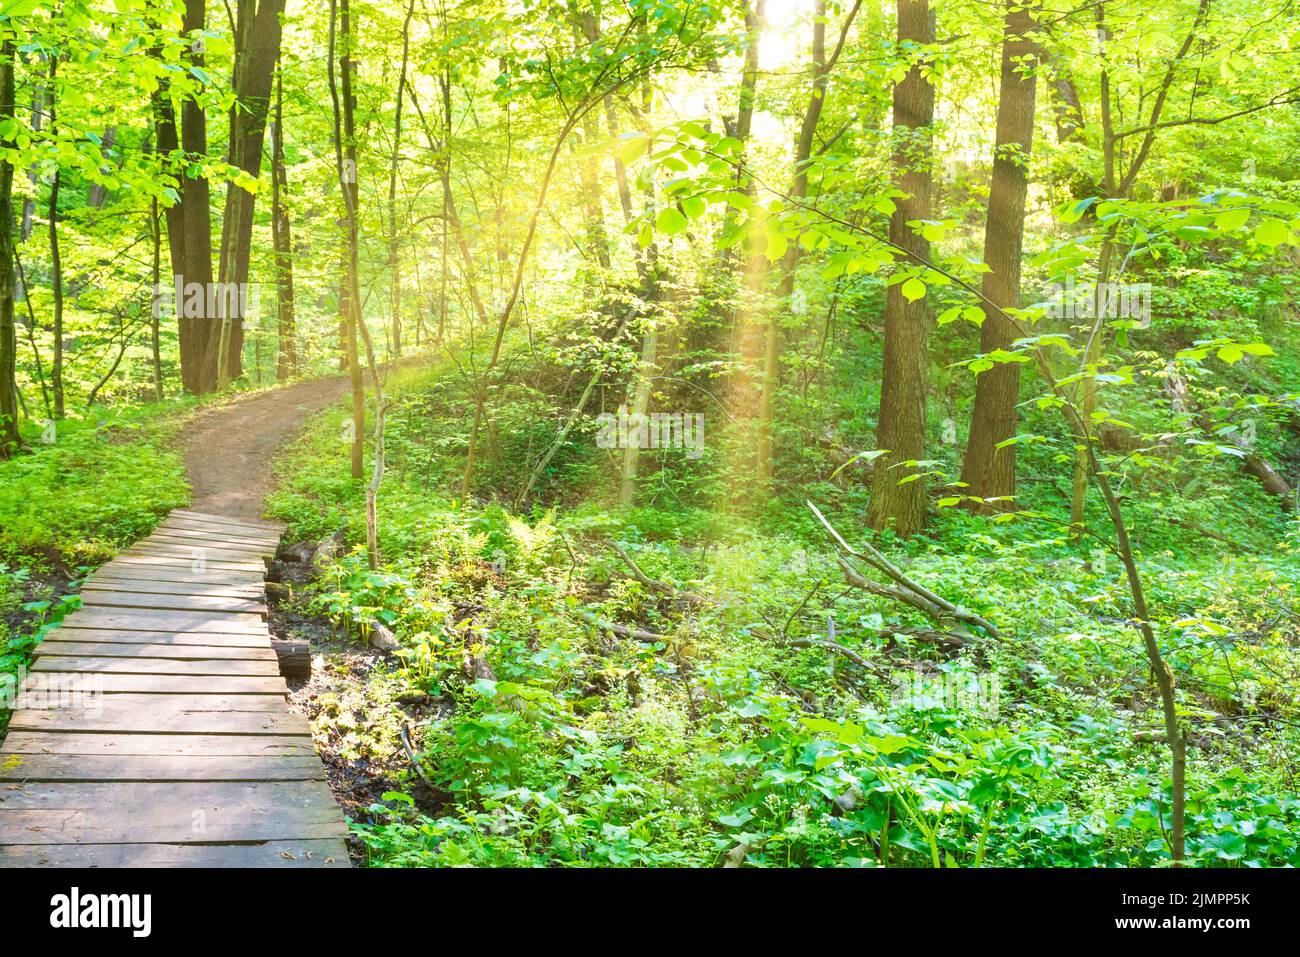 Wooden bridge in green forest Stock Photo